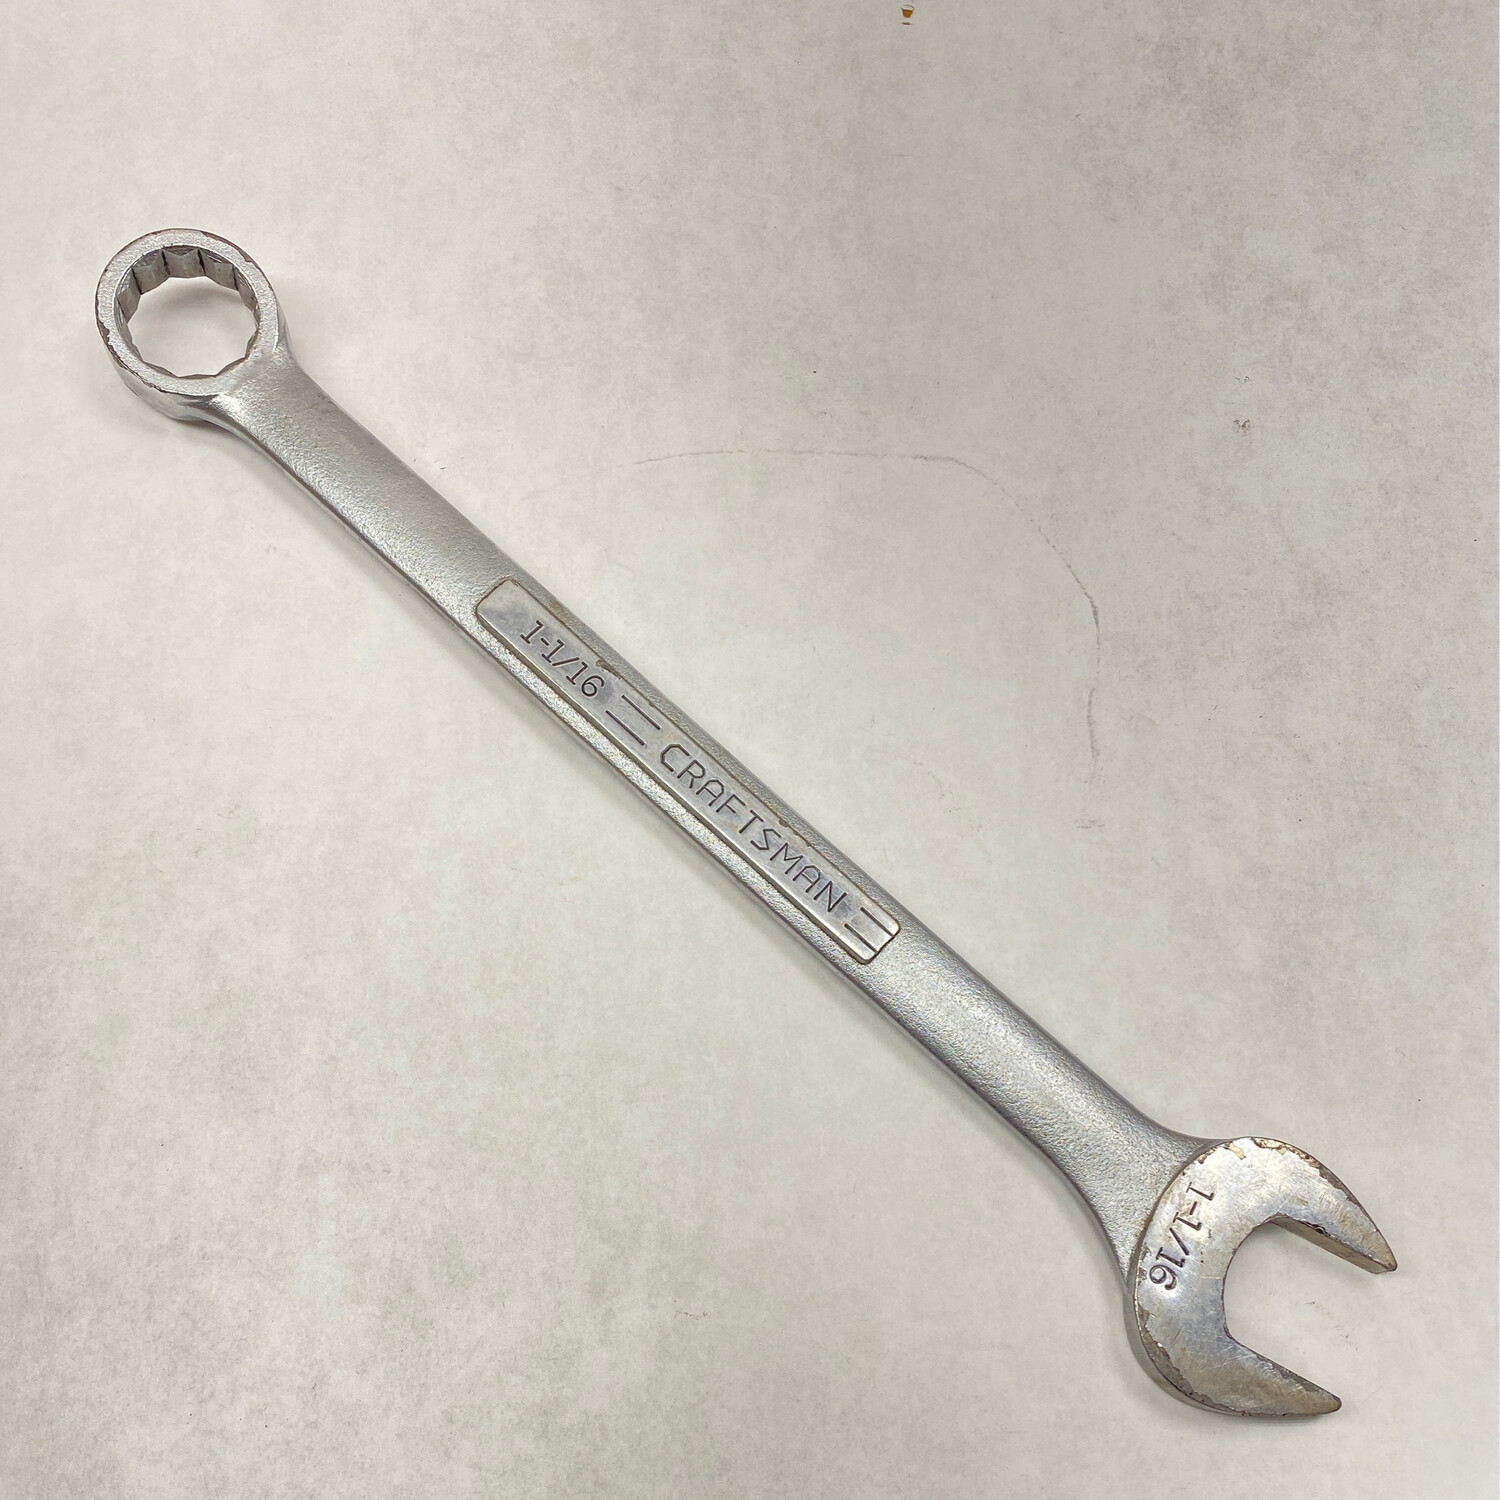 Craftsman 14” Combination Wrench (1 1/16”), V44706